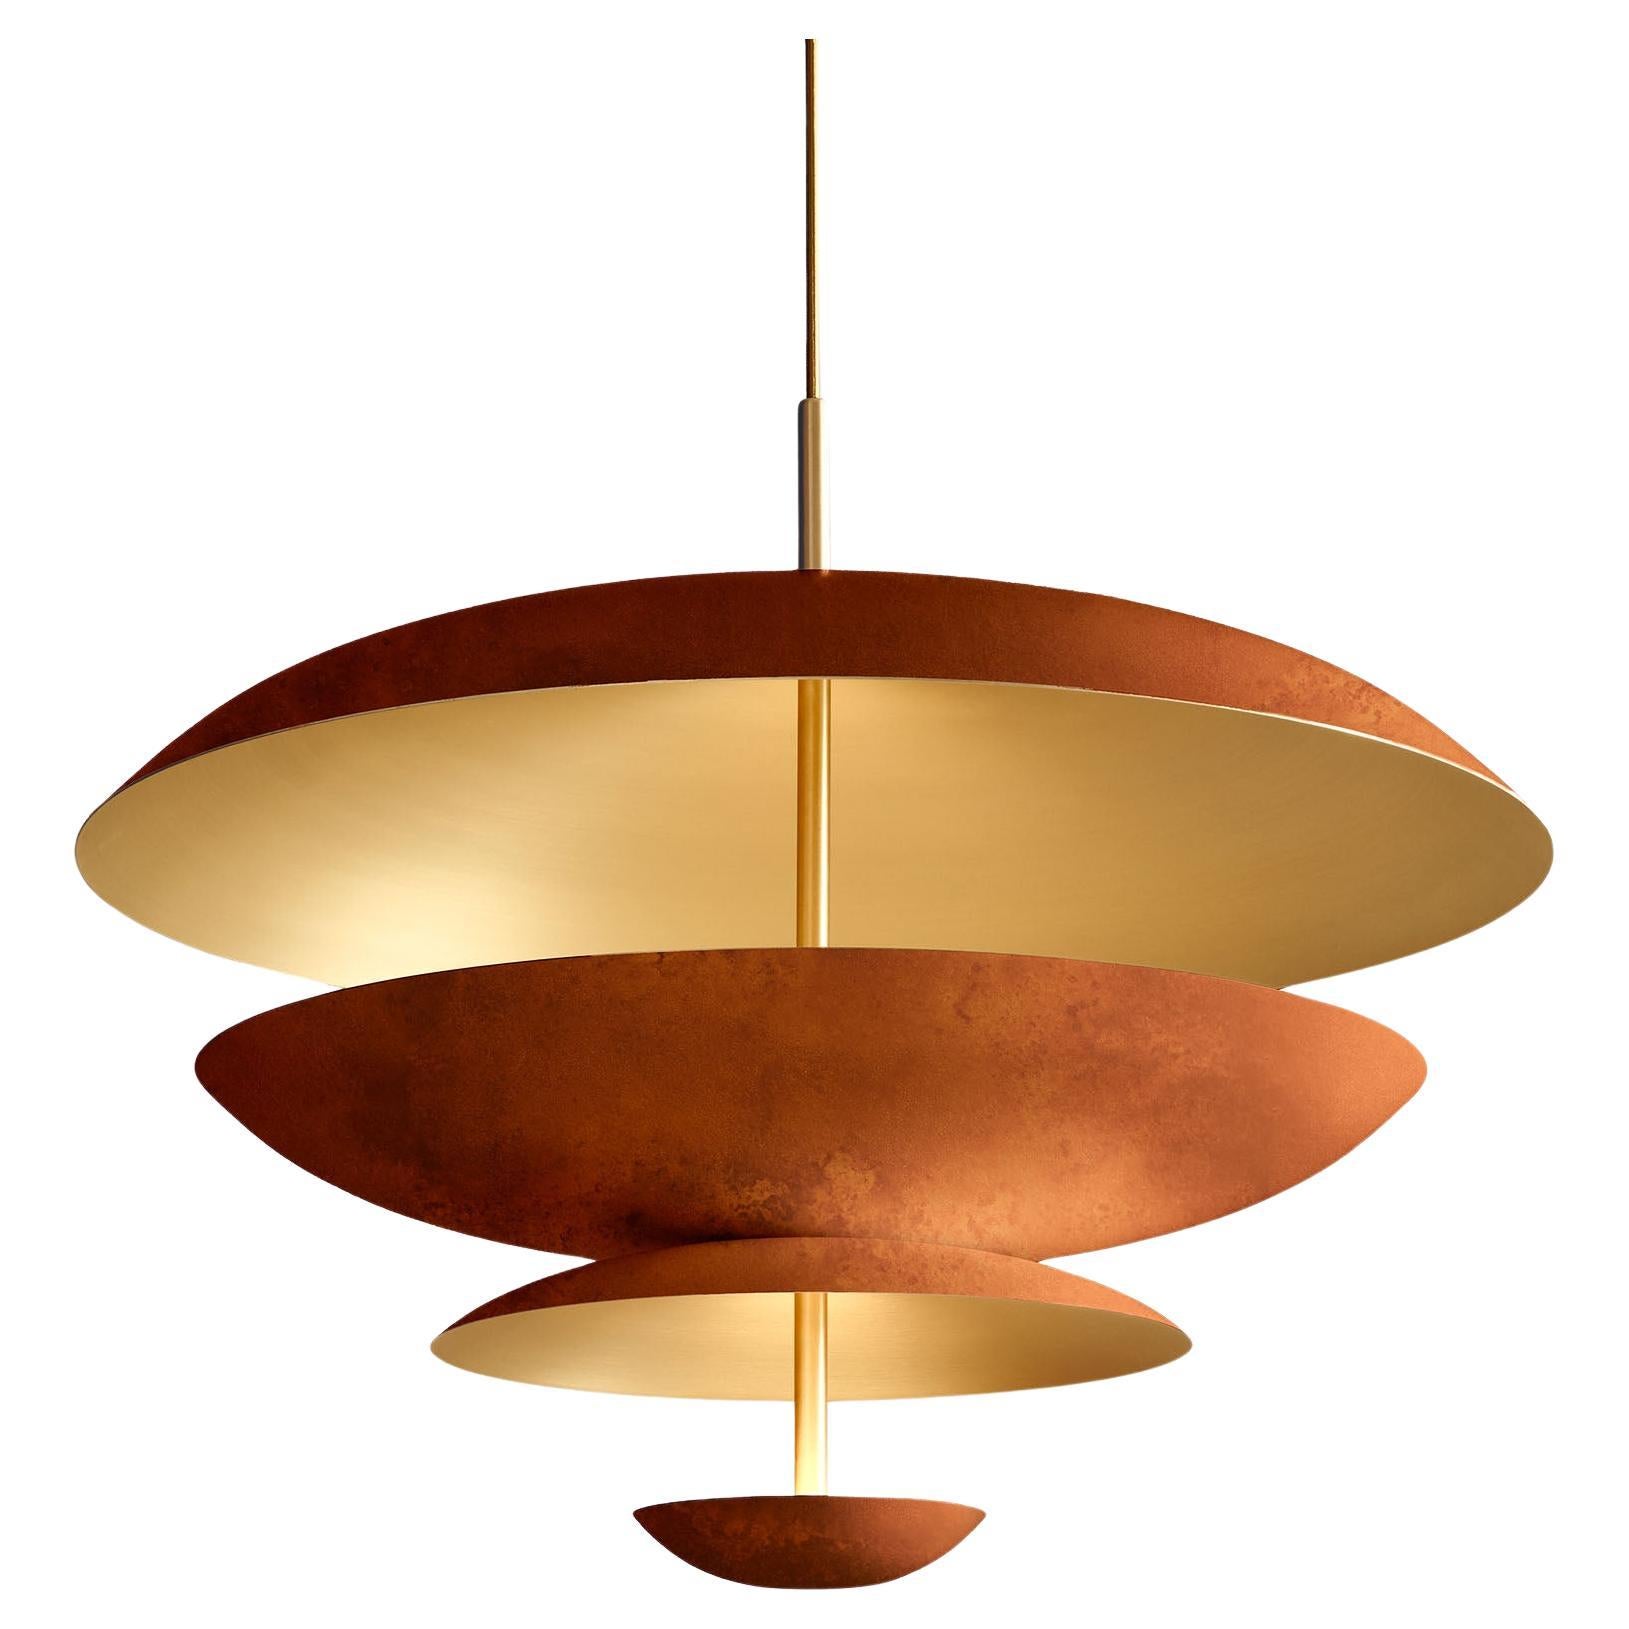 'Cosmic Rust Chandelier 70' Handmade Rust Patinated Brass Ceiling Light For Sale